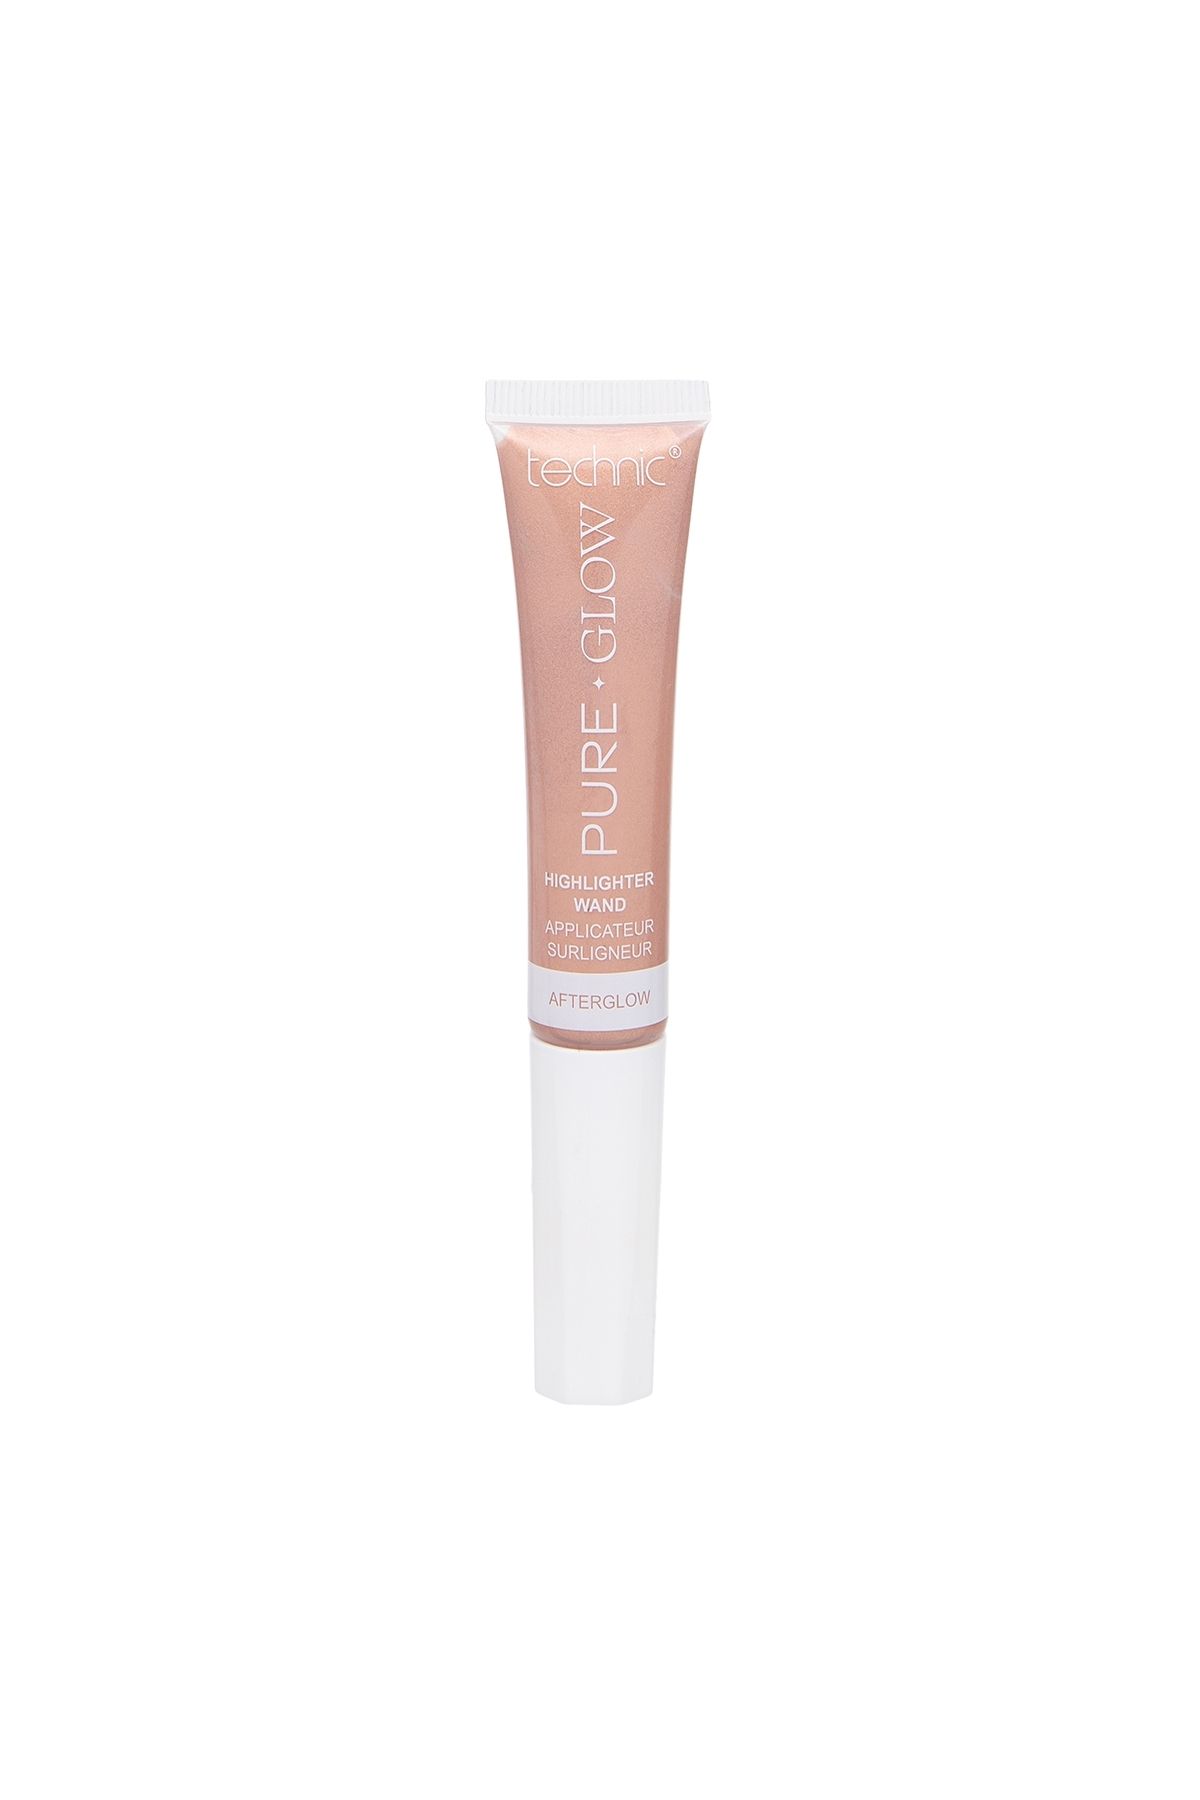 Technic Pure Glow Highlighter Wand - Afterglow 12ML